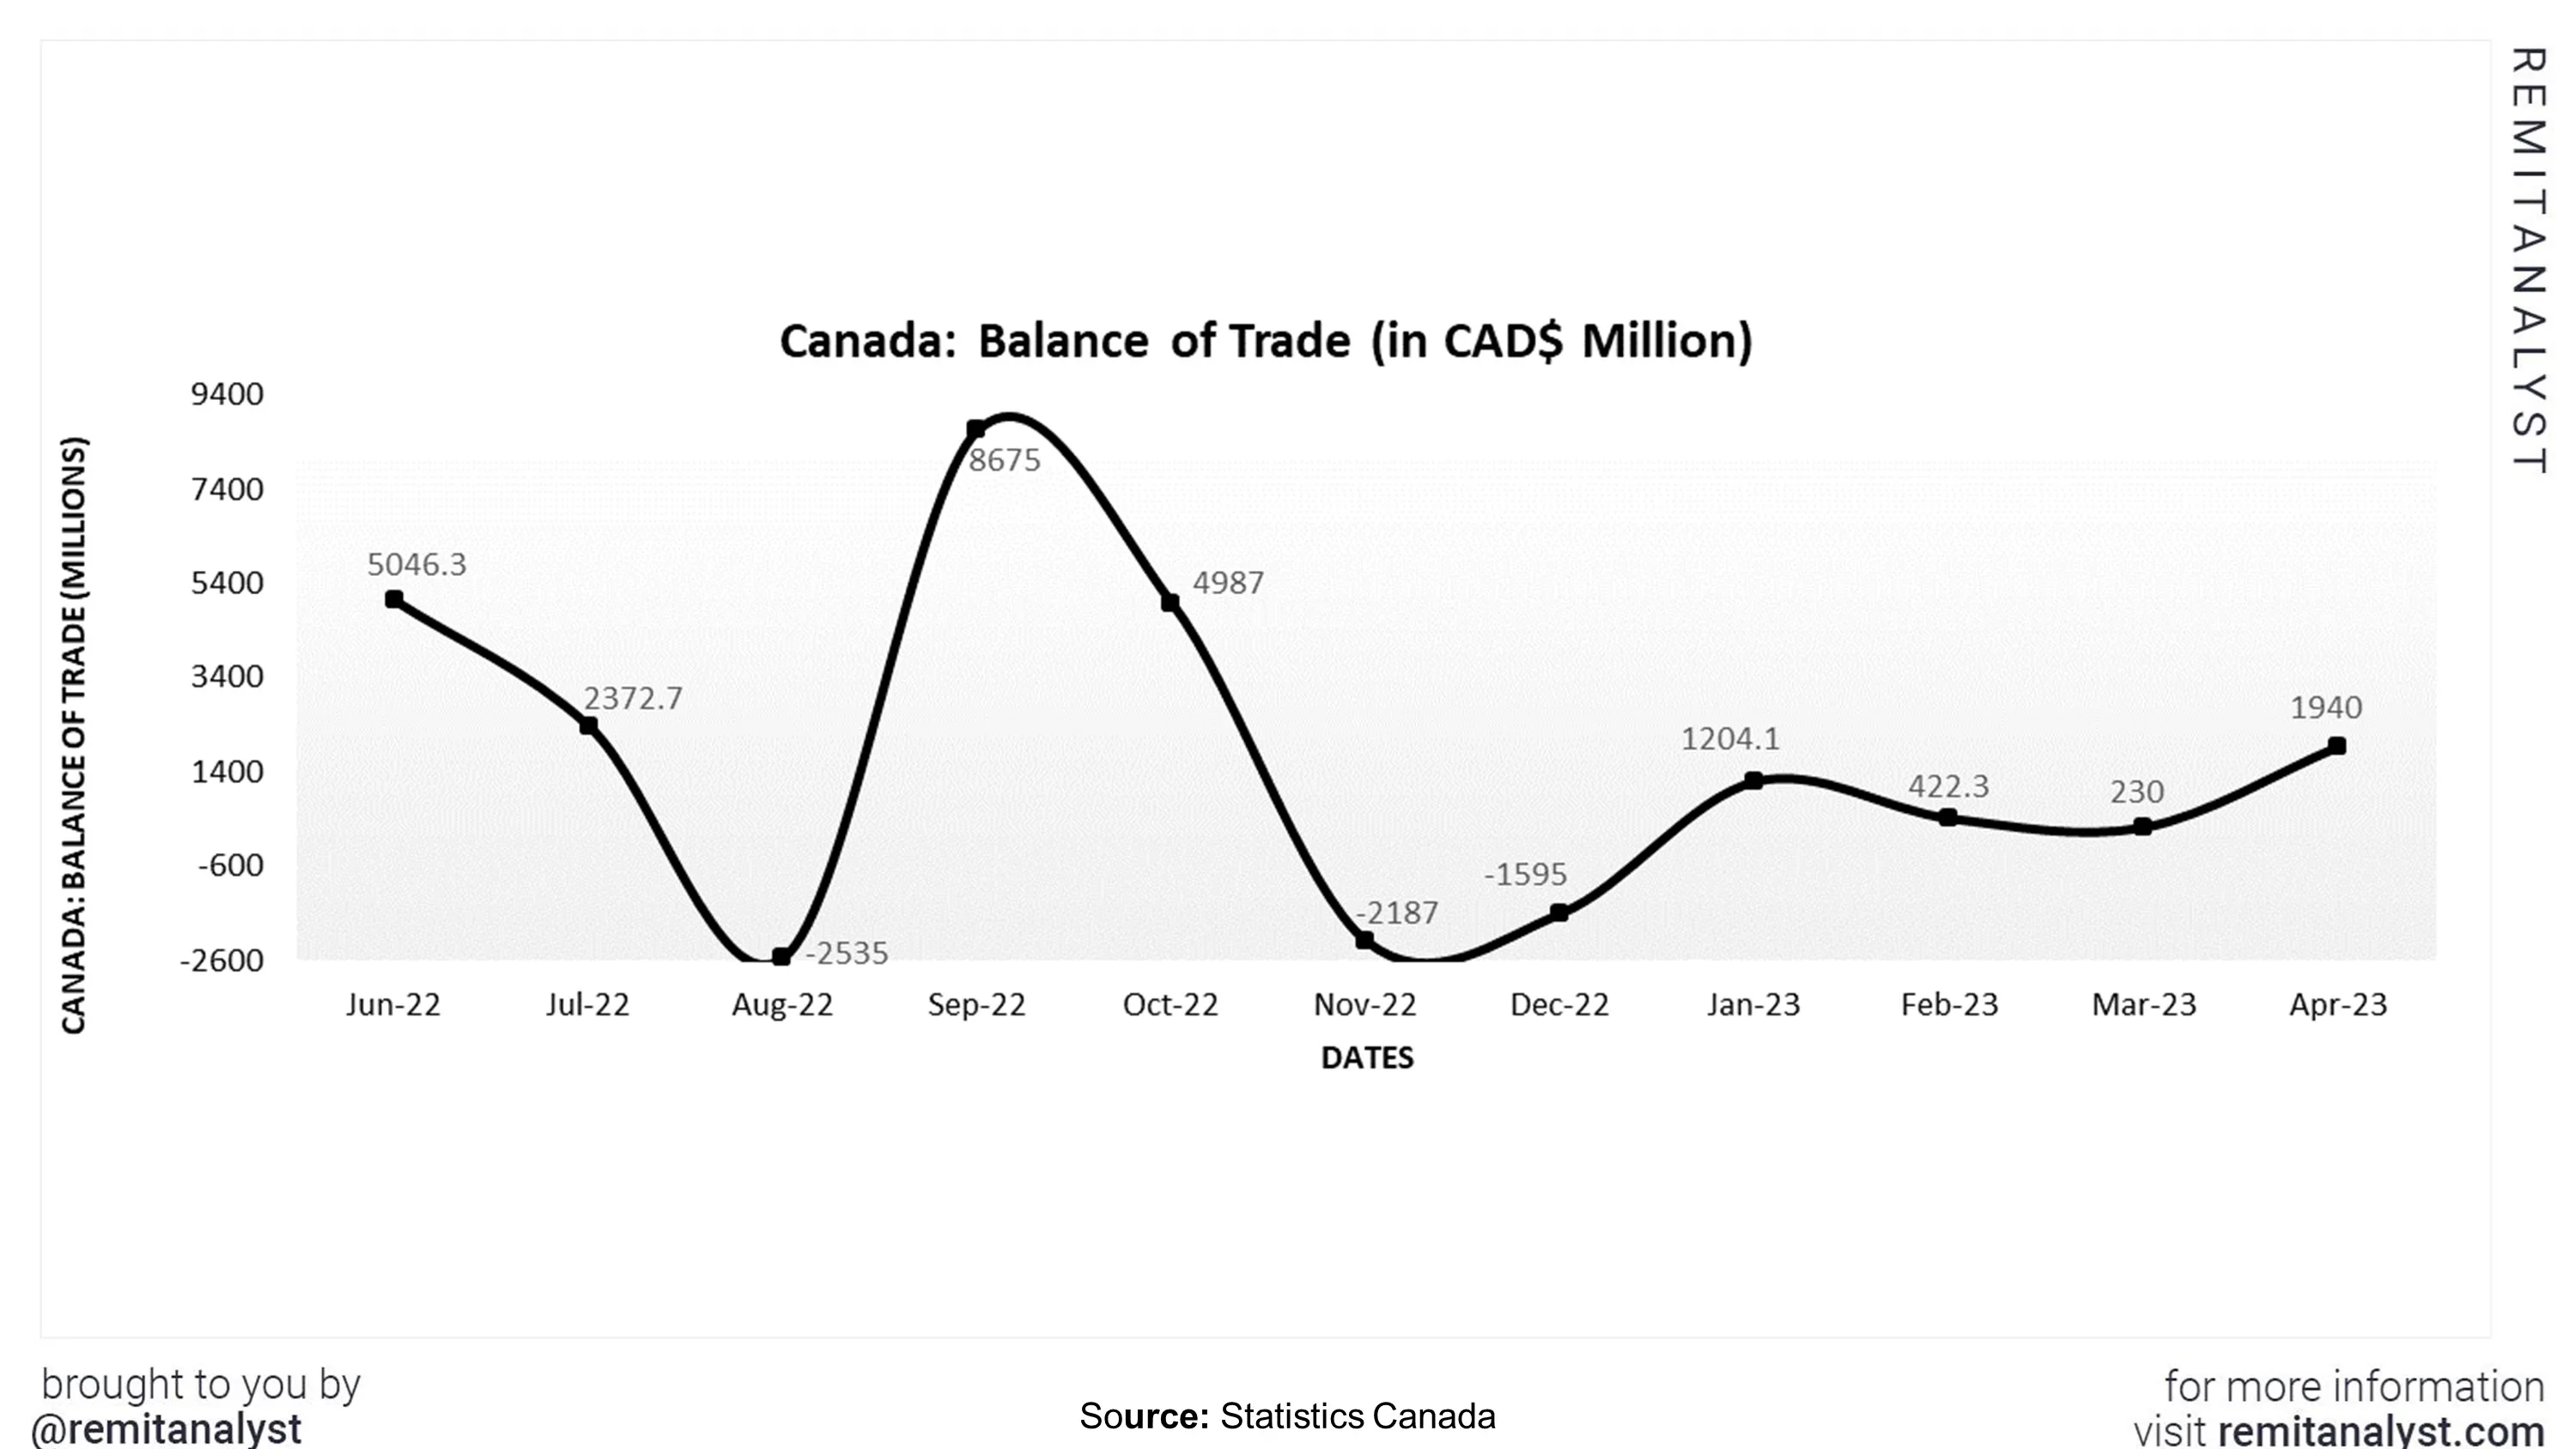 balance-of-trade-canada-from-jun-2022-to-apr-2022